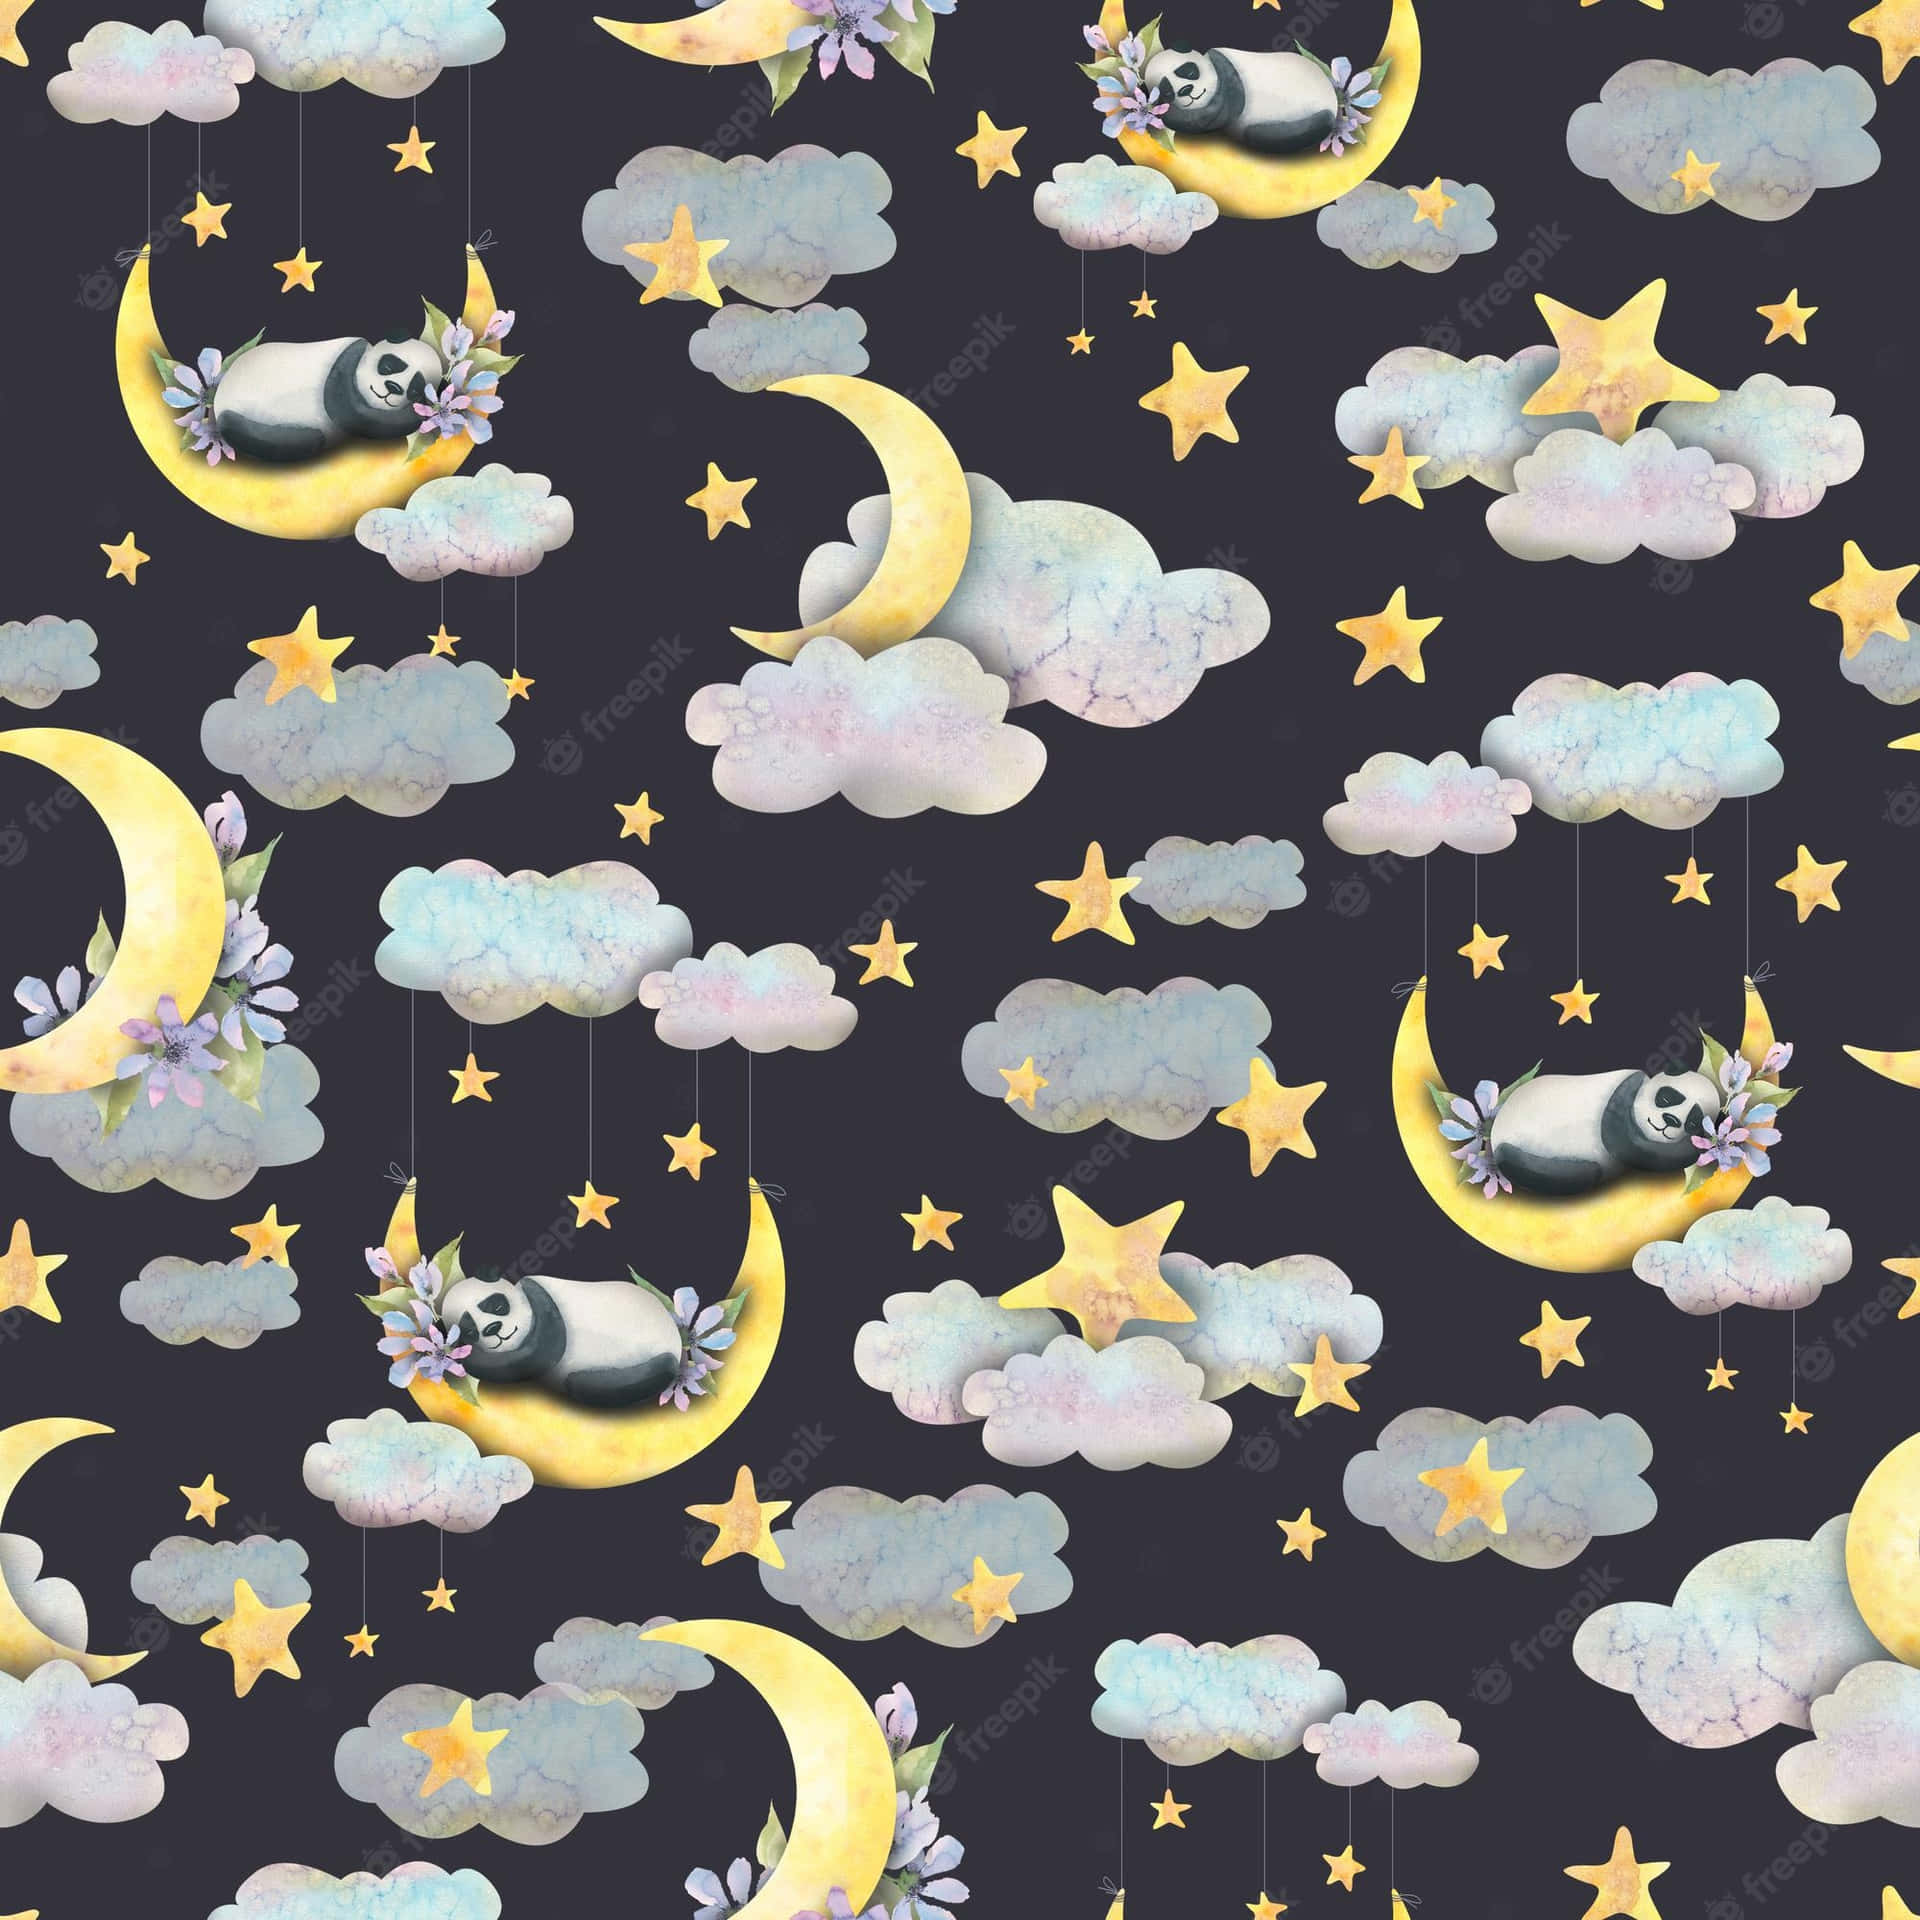 A beautiful night sky with a cute moon Wallpaper